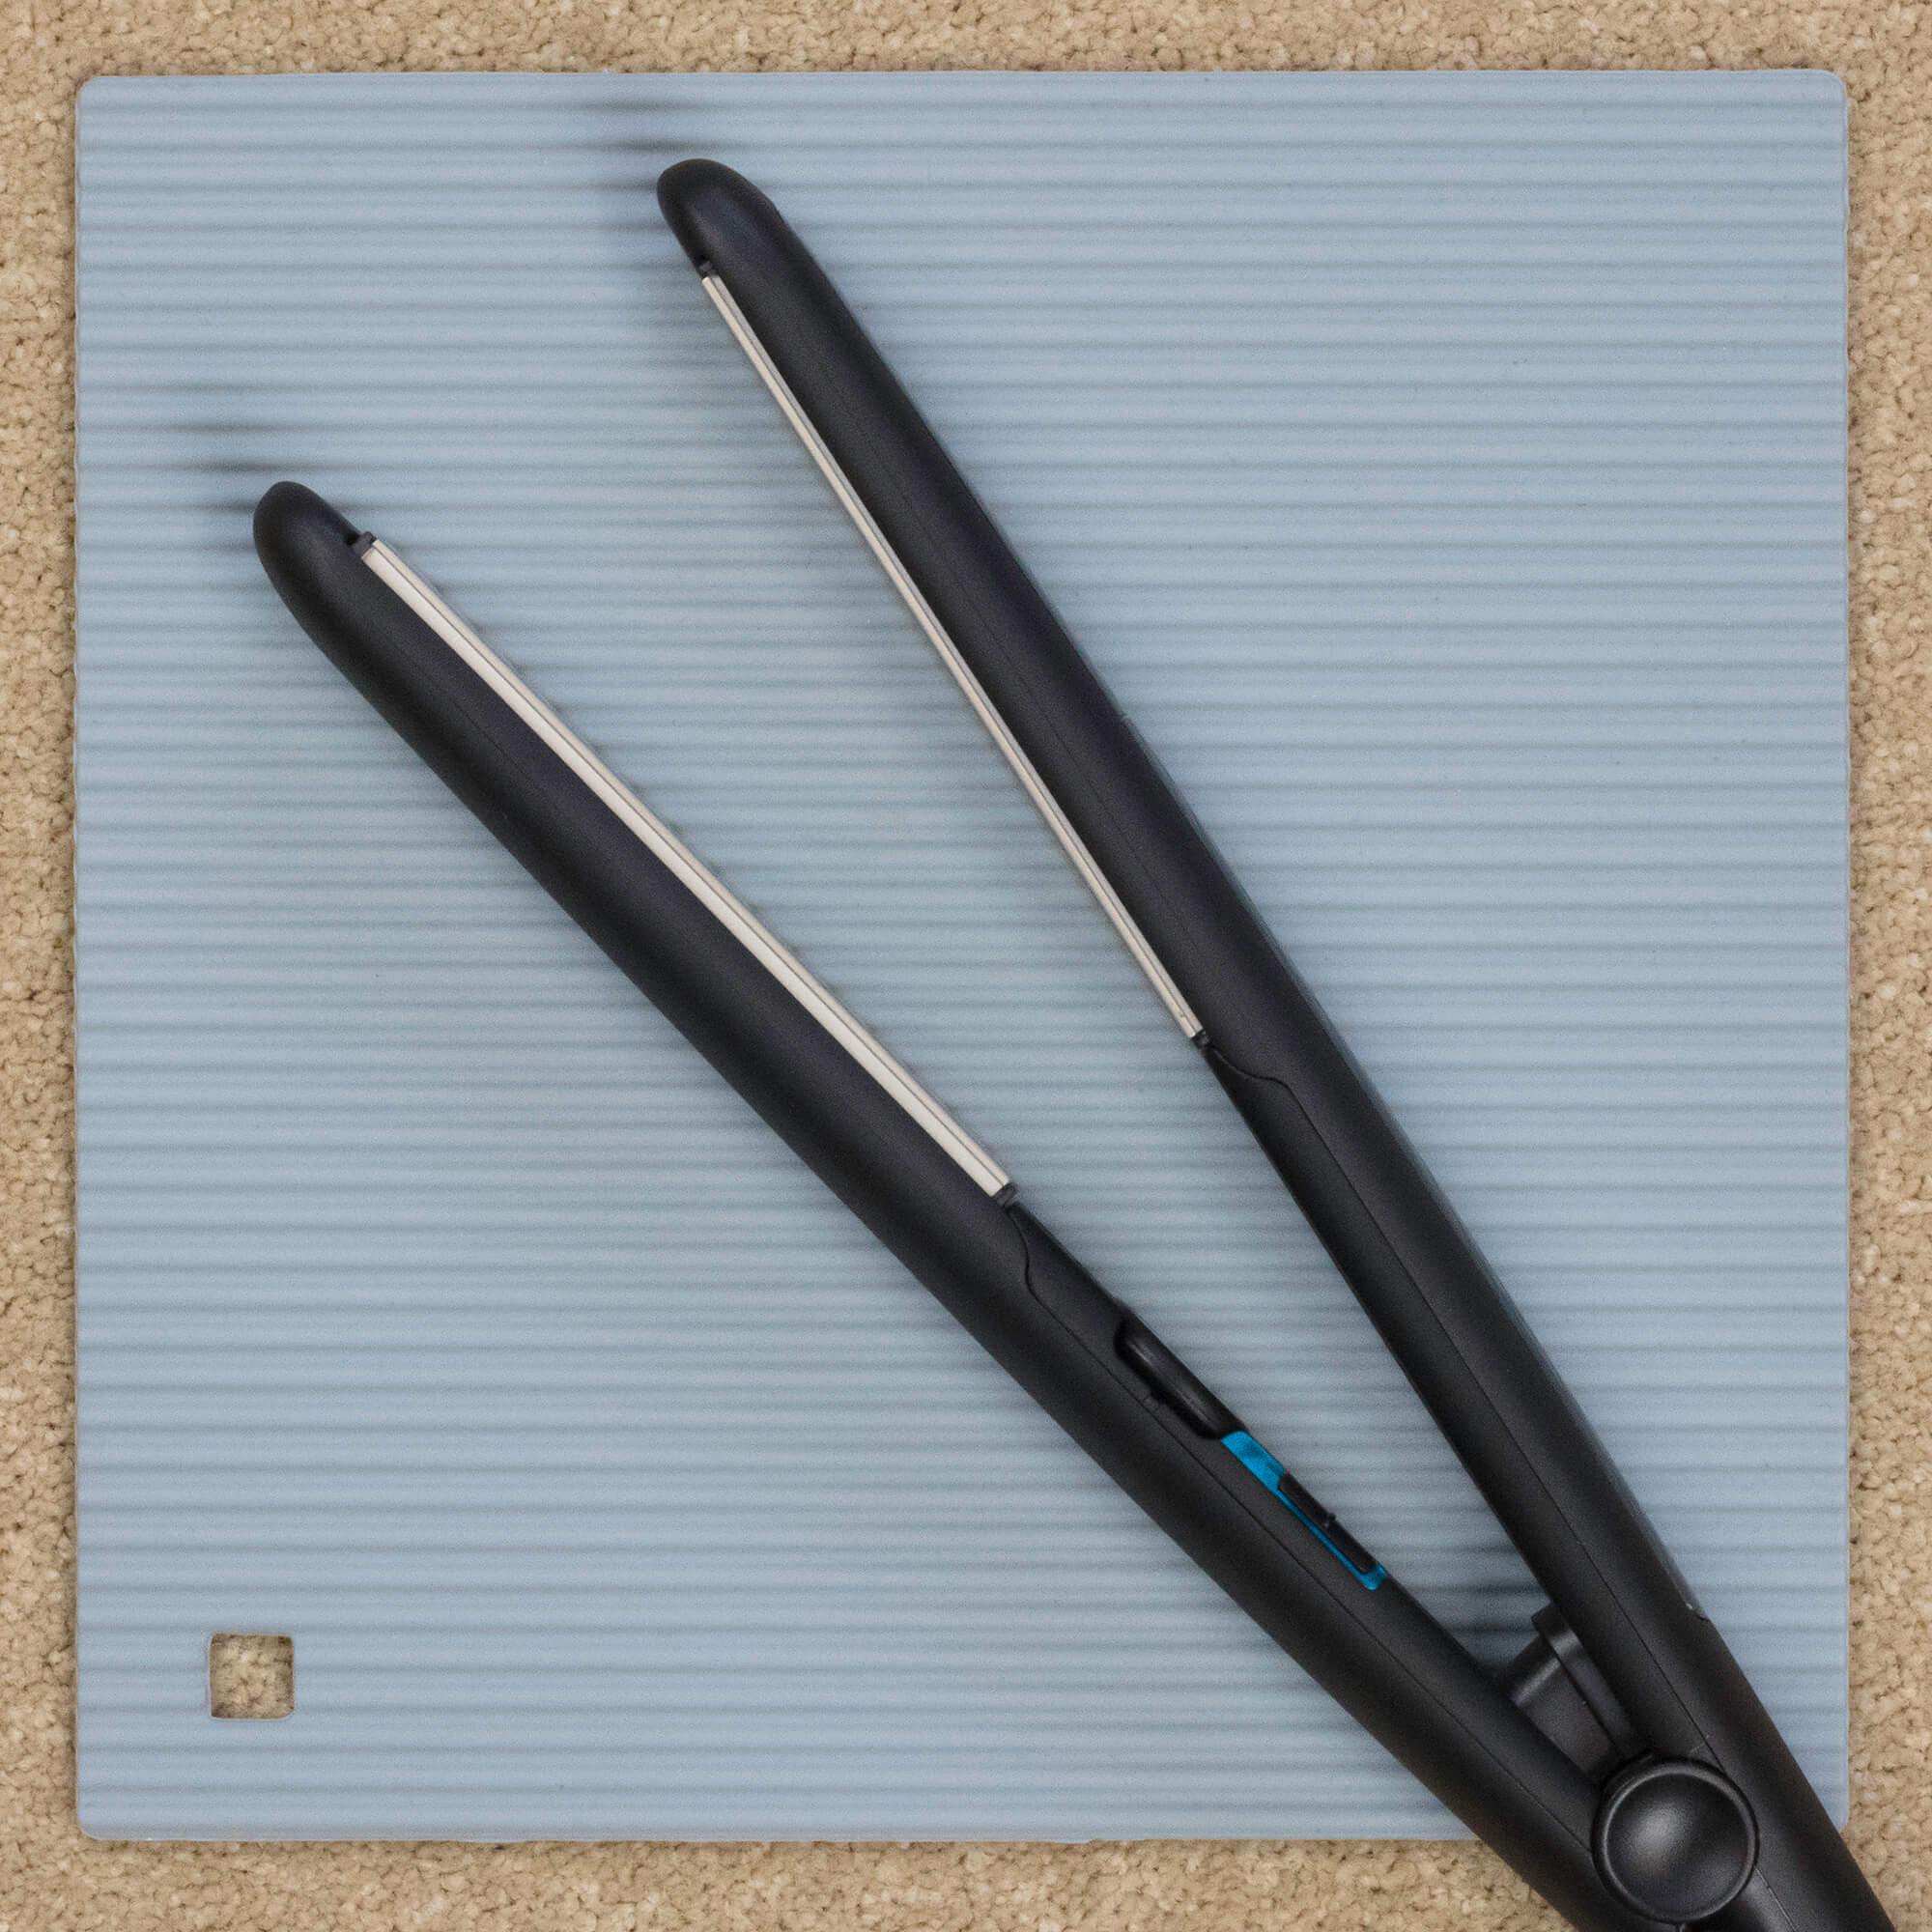 Using a Zeal Silicone Hot Mat to protect surfaces from hair straighteners